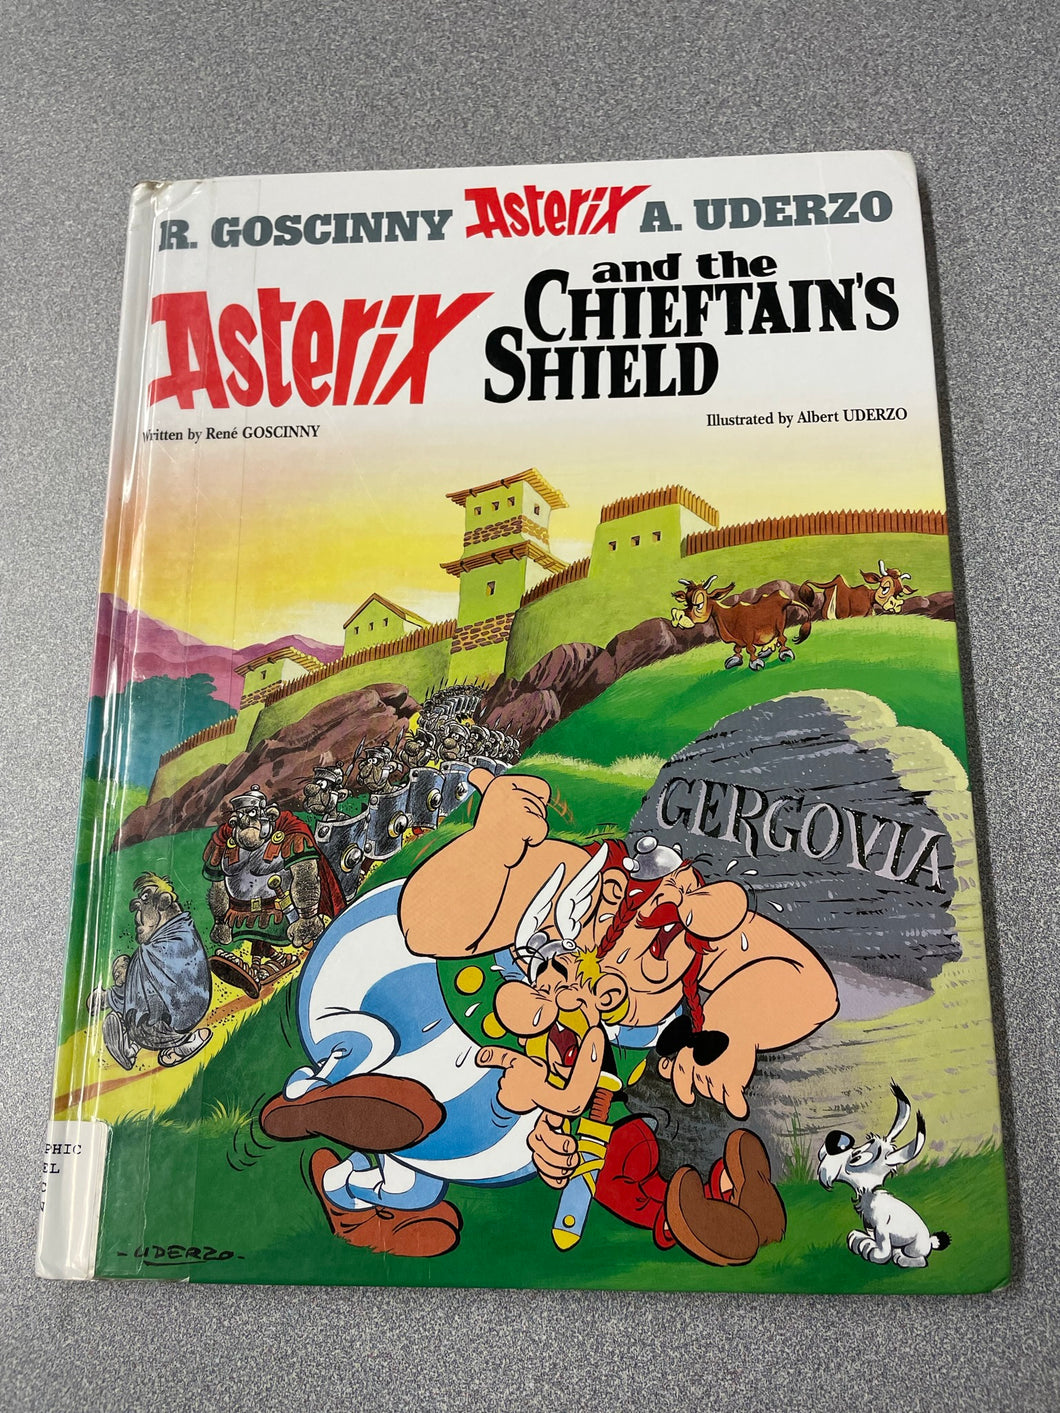 Asterix and the Chieftain's Shield, Rene Goscinny and Albert Uderzo 1968 GN